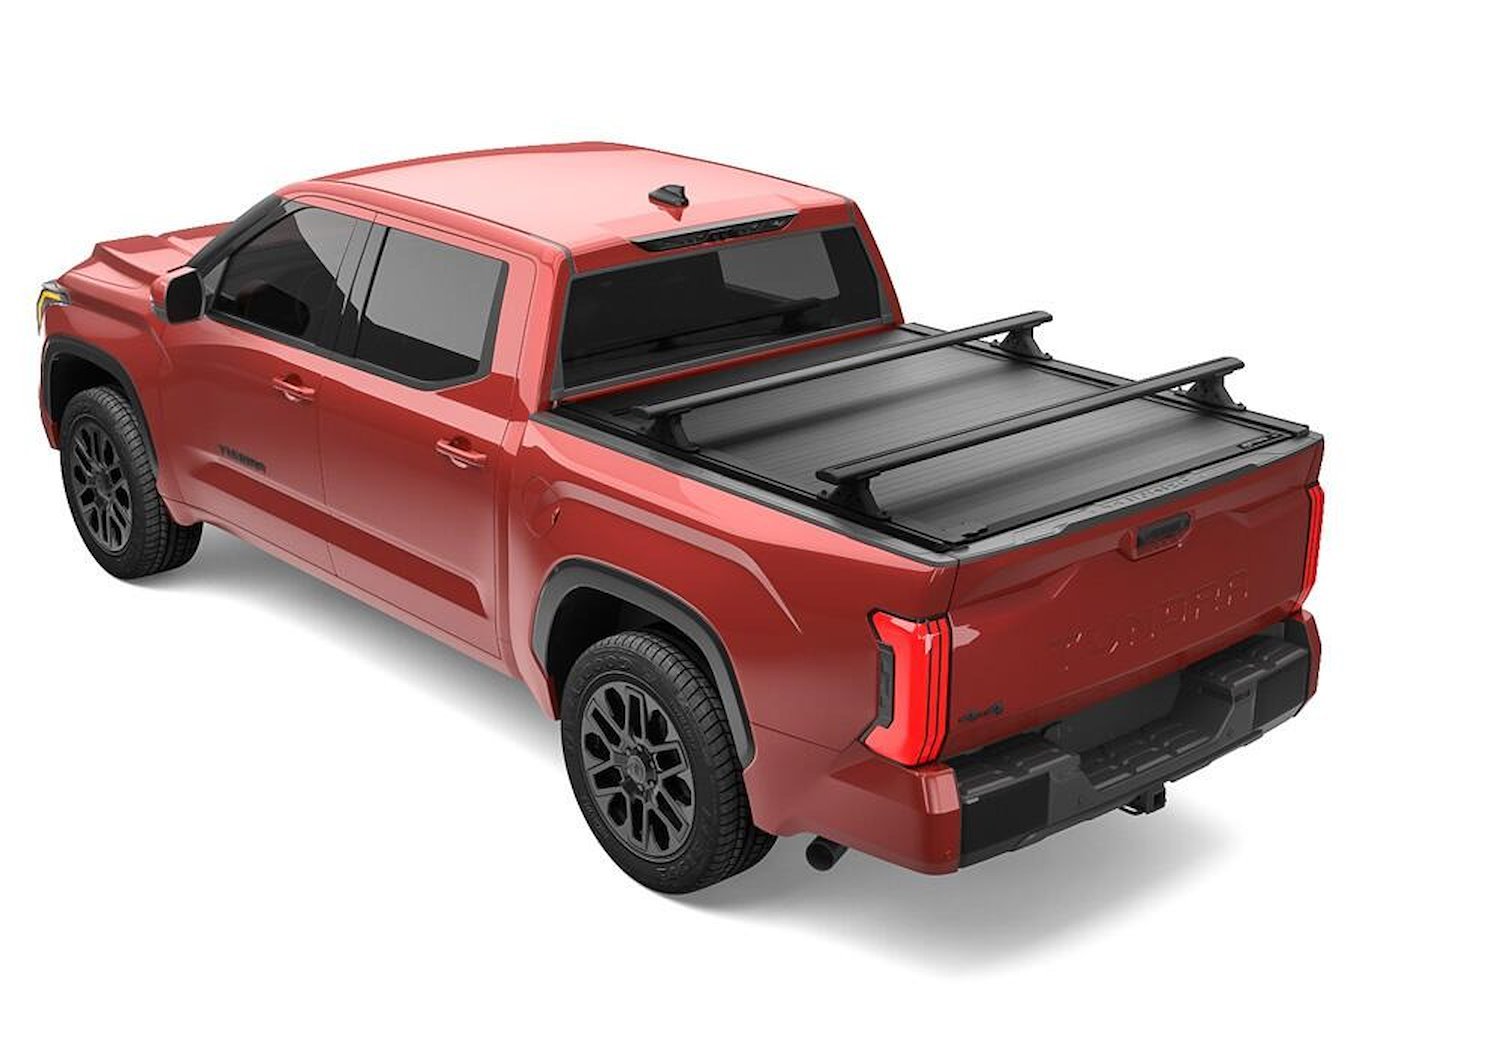 T-60863 RetraxOne XR Retractable Tonneau Cover Fits Select Toyota Tundra Regular/Double Cab 6' 7" Bed with Deck Rail System